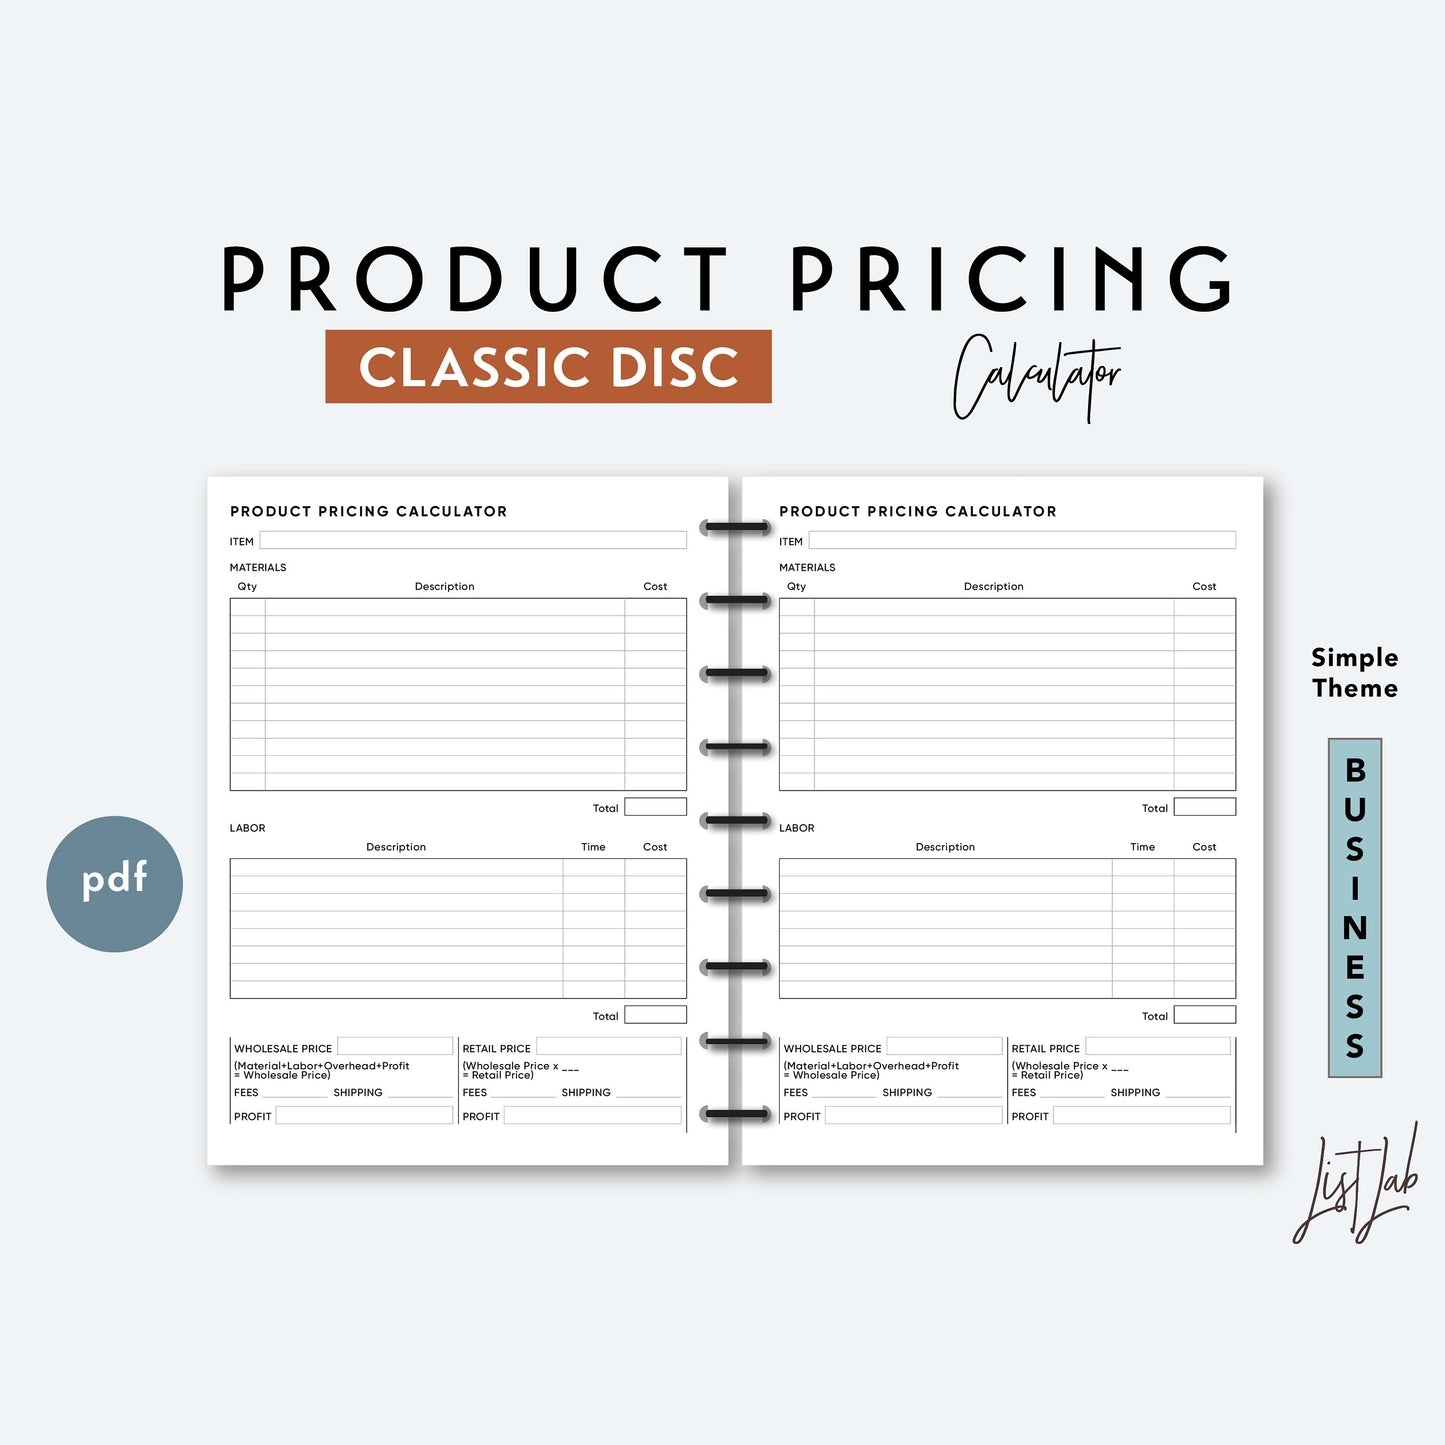 Classic Discbound PRODUCT PRICING CALCULATOR Printable Insert Set